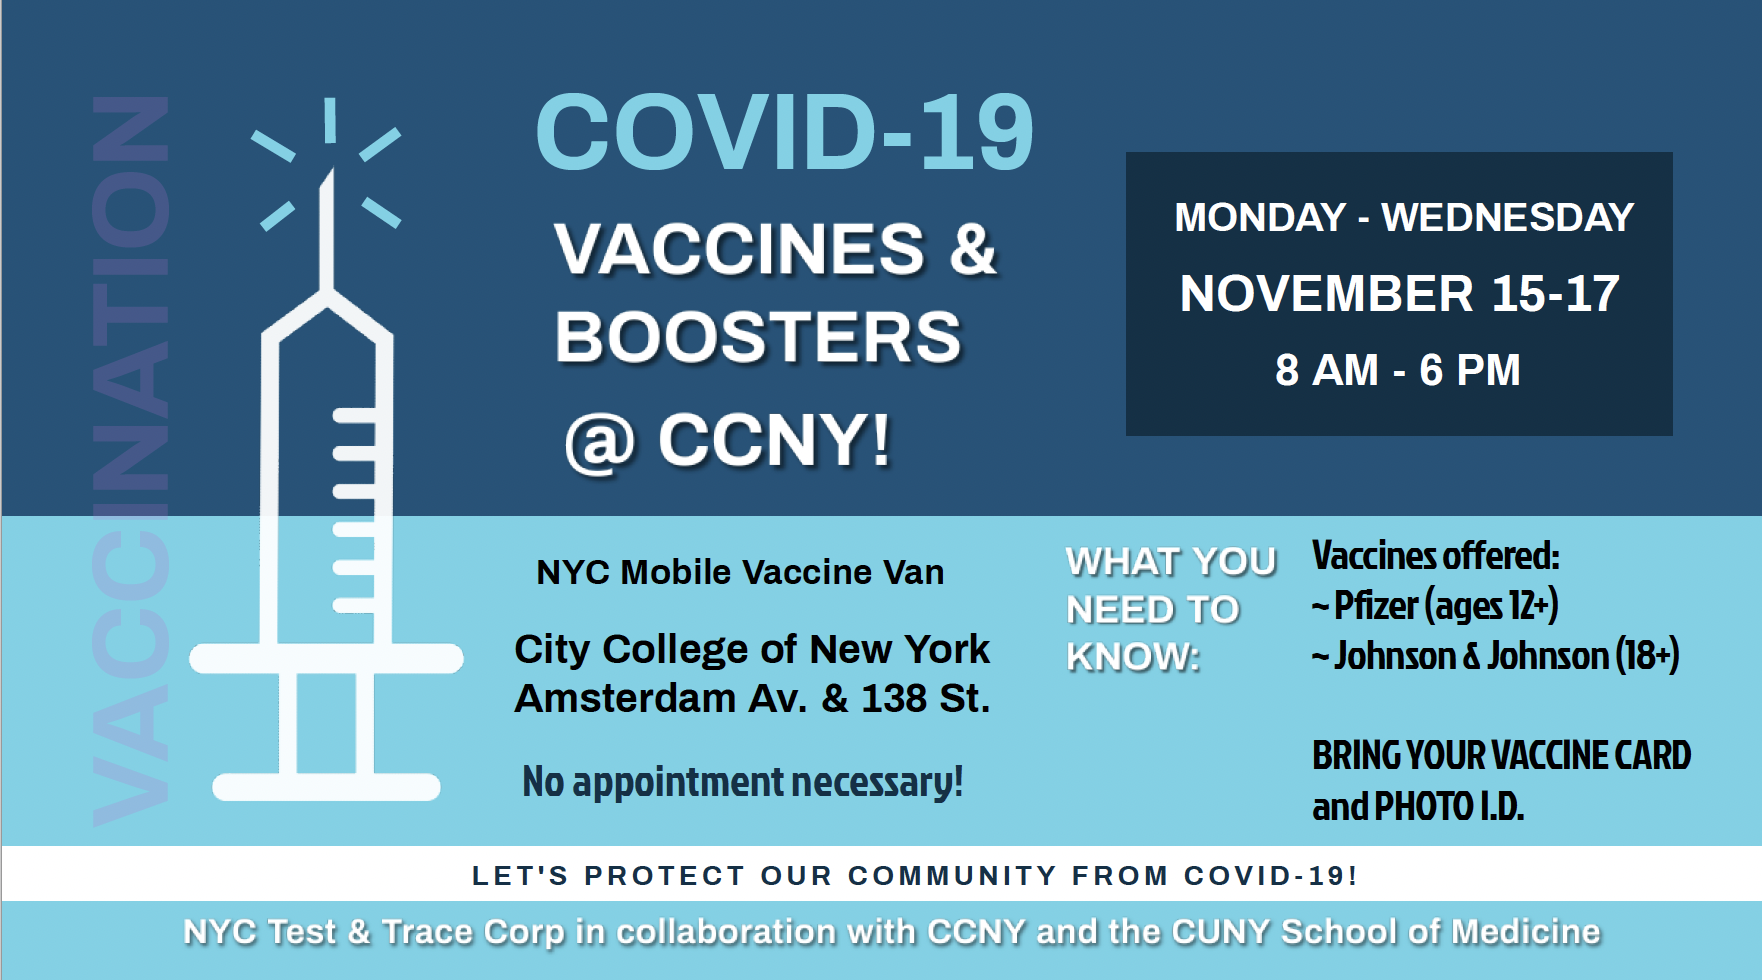  COVID-19 booster vaccines on campus 